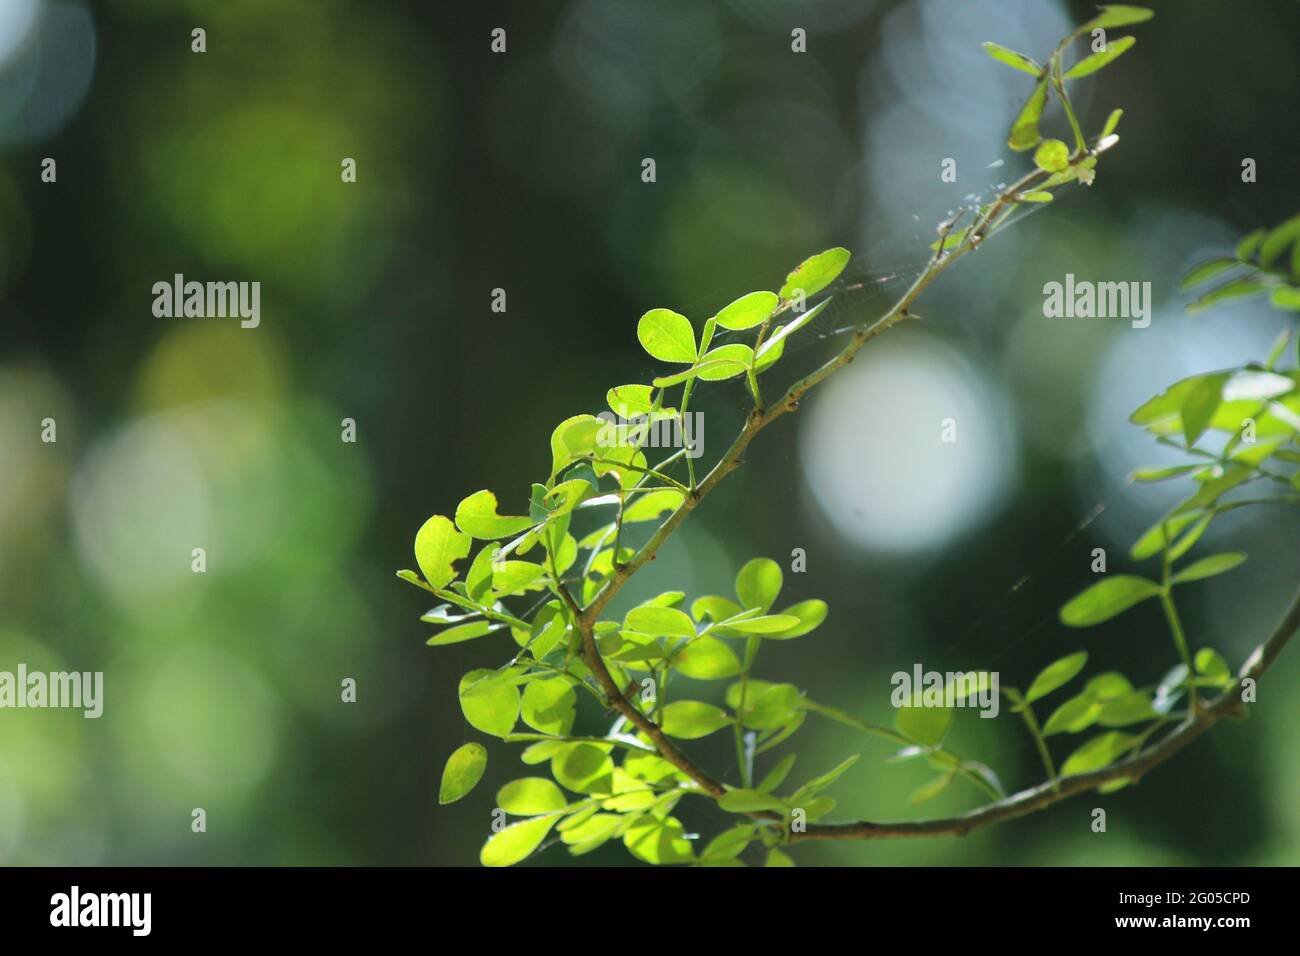 Wood apple plant leaves beautiful background. Wood apple is a common name for several trees of Aurantioideae with edible fruits and may refer to: Aegl Stock Photo